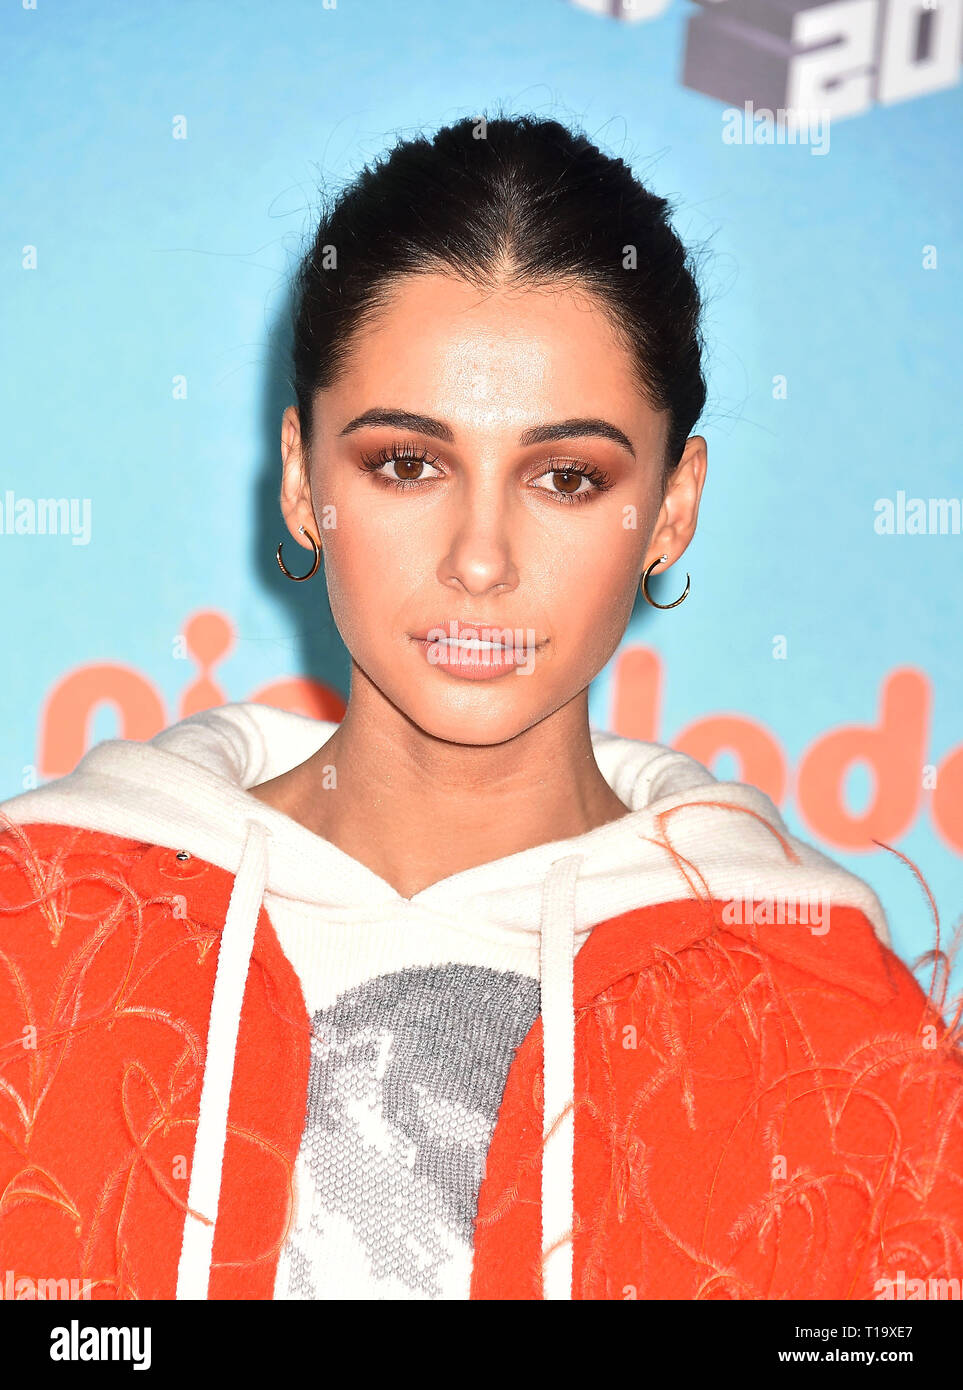 LOS ANGELES, CA - MARCH 23: Naomi Scott attends Nickelodeon's 2019 Kids' Choice Awards at Galen Center on March 23, 2019 in Los Angeles, California. Stock Photo